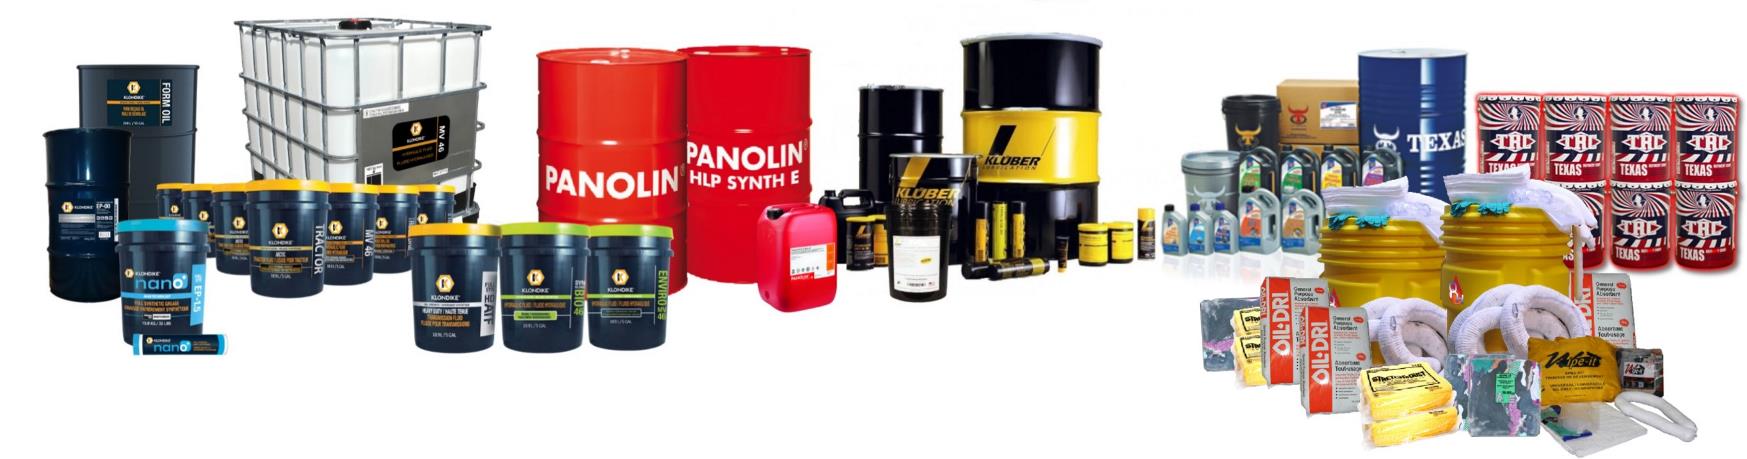 We Distribute a Wide Range of Quality Lubricants Designed for your Mobile or Industrial Equipments.
MINERAL, SYNTHETIC or BIODEGRADABLE as Well as Absorbents Products.
QuebecHydraulics.com